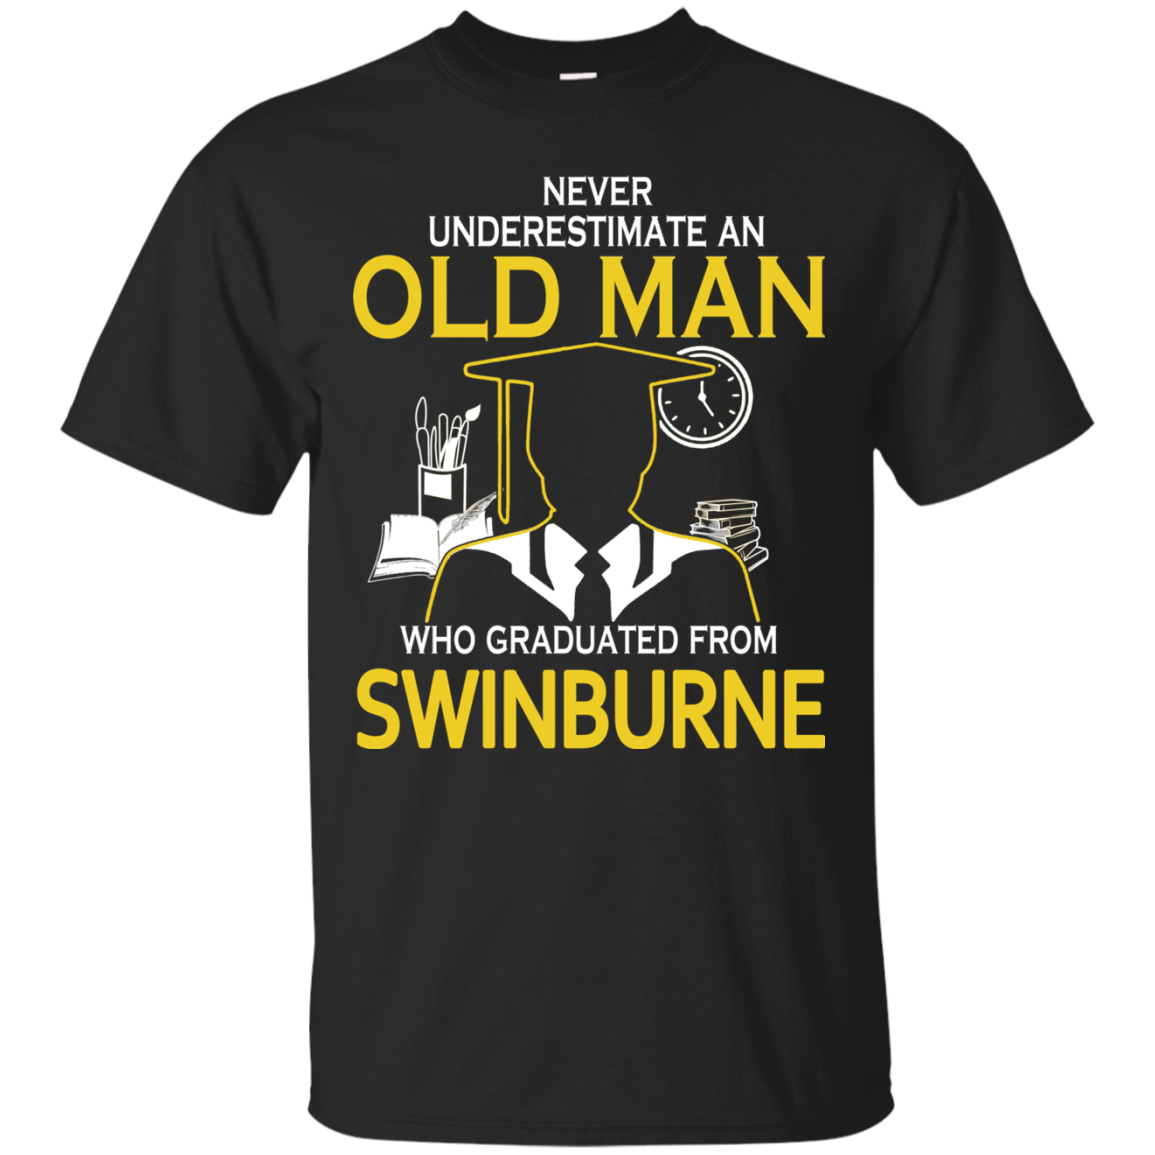 Old Man Swinburne Shirts Never Underestimate Old Man Graduated From ...